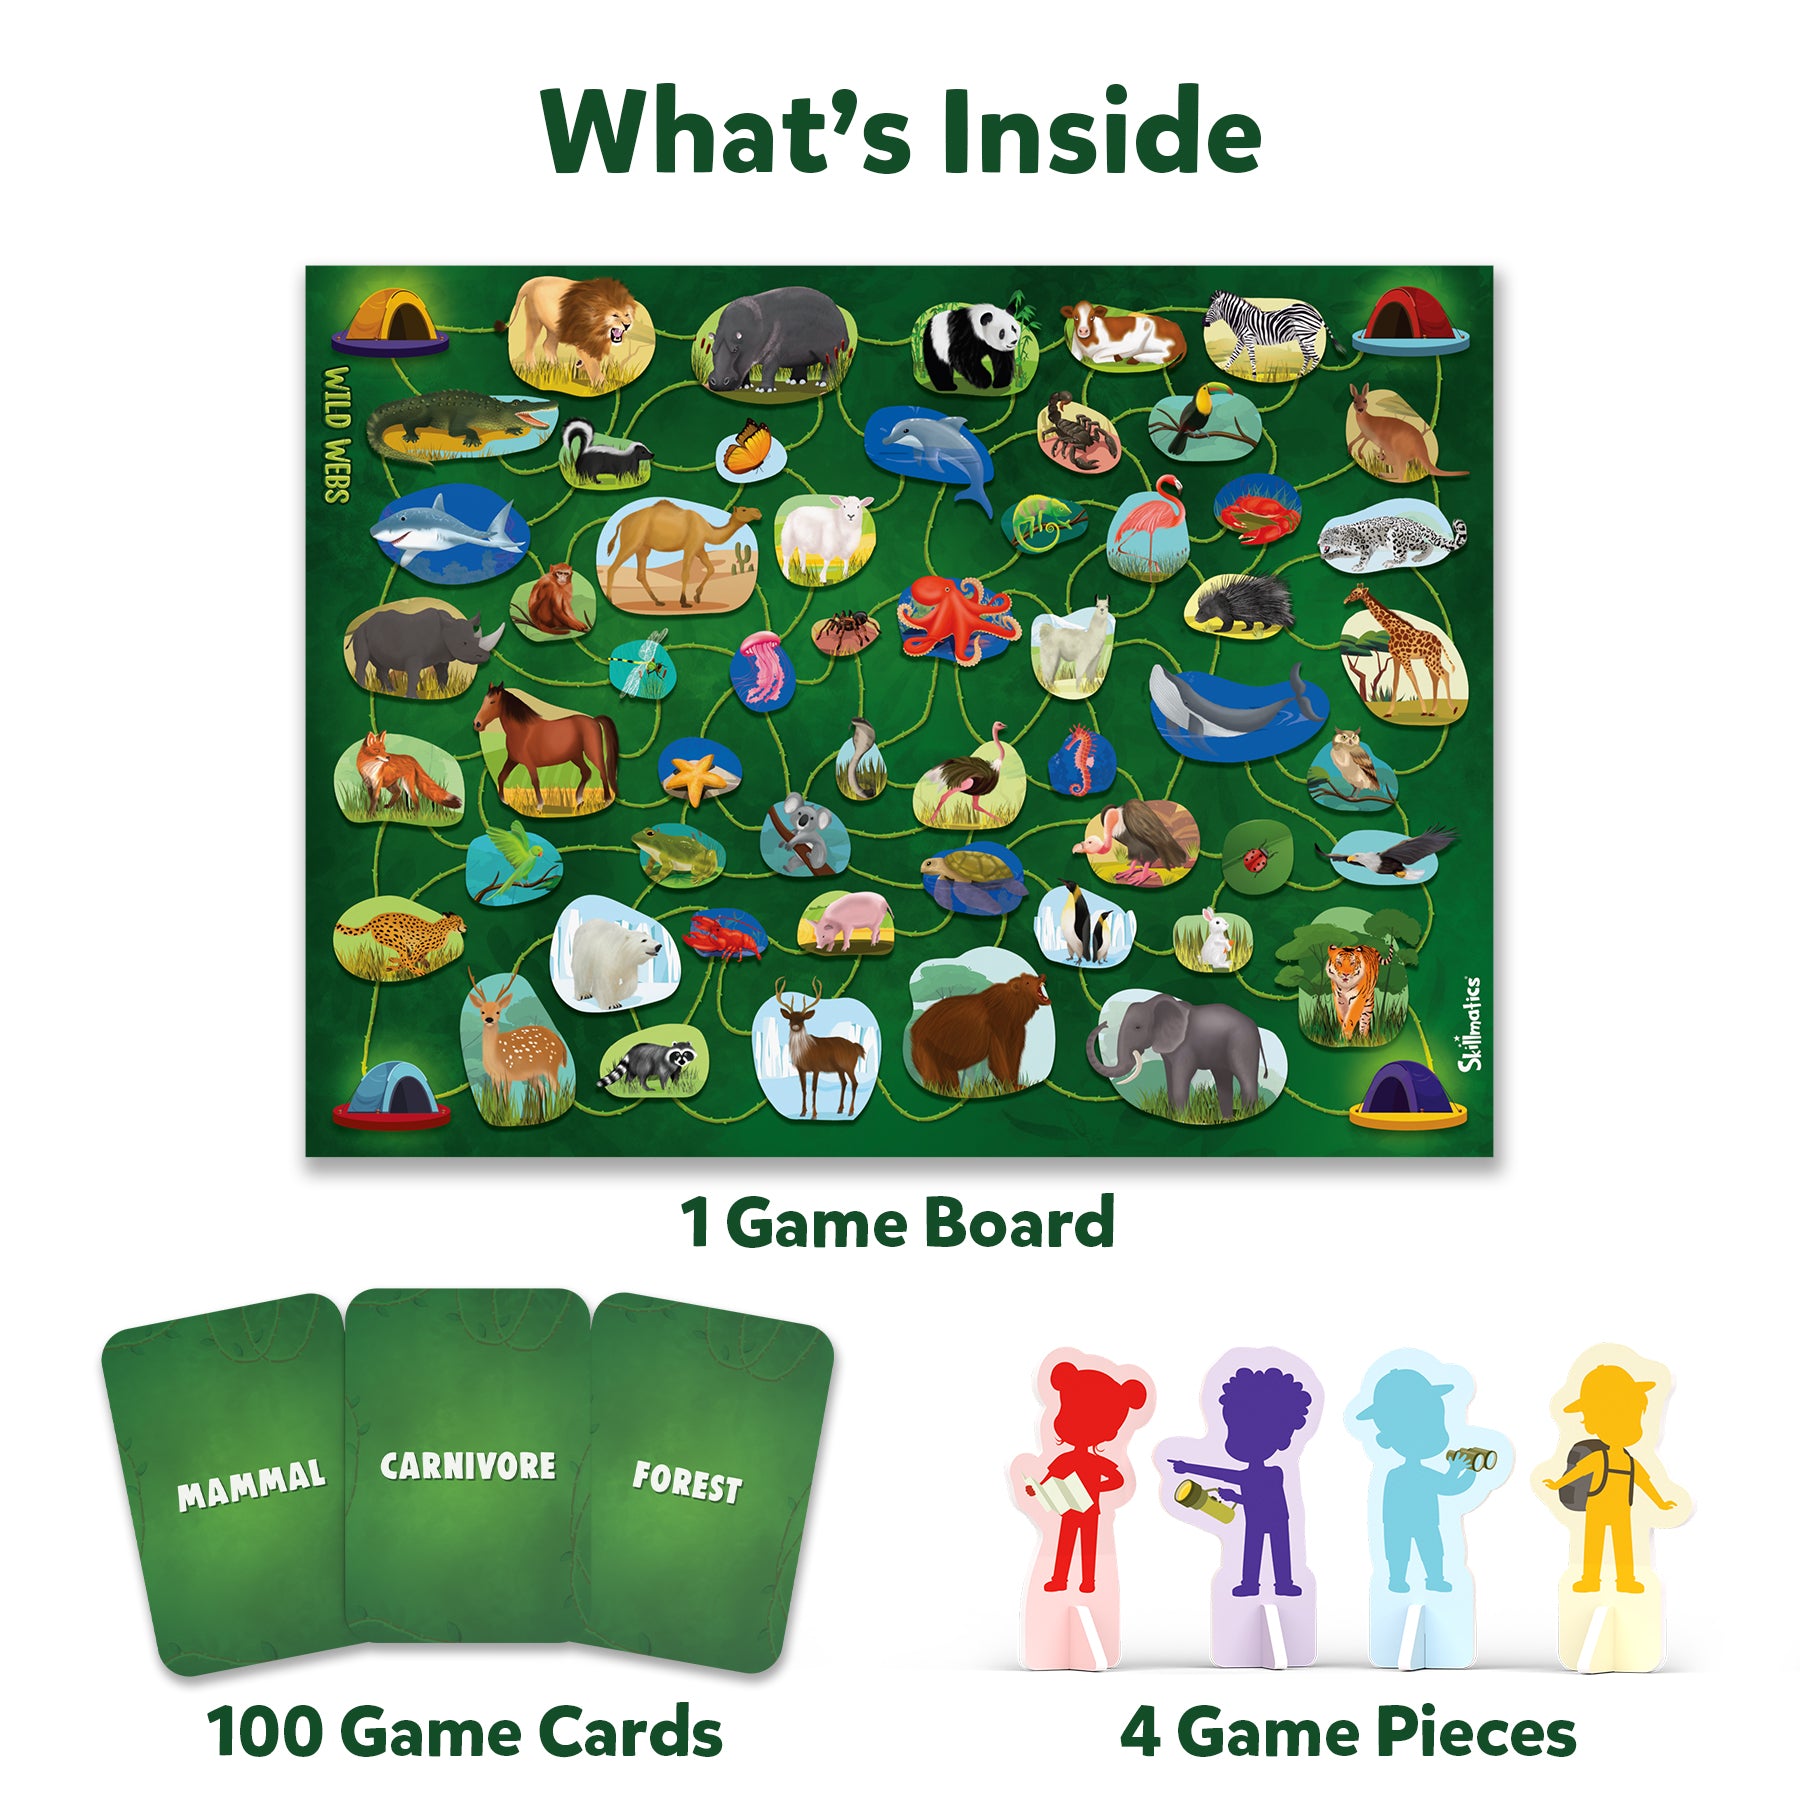 Skillmatics Board Game - Wild Webs, Animal Learning Game, Gifts, Family Friendly Games for Ages 6 and Up